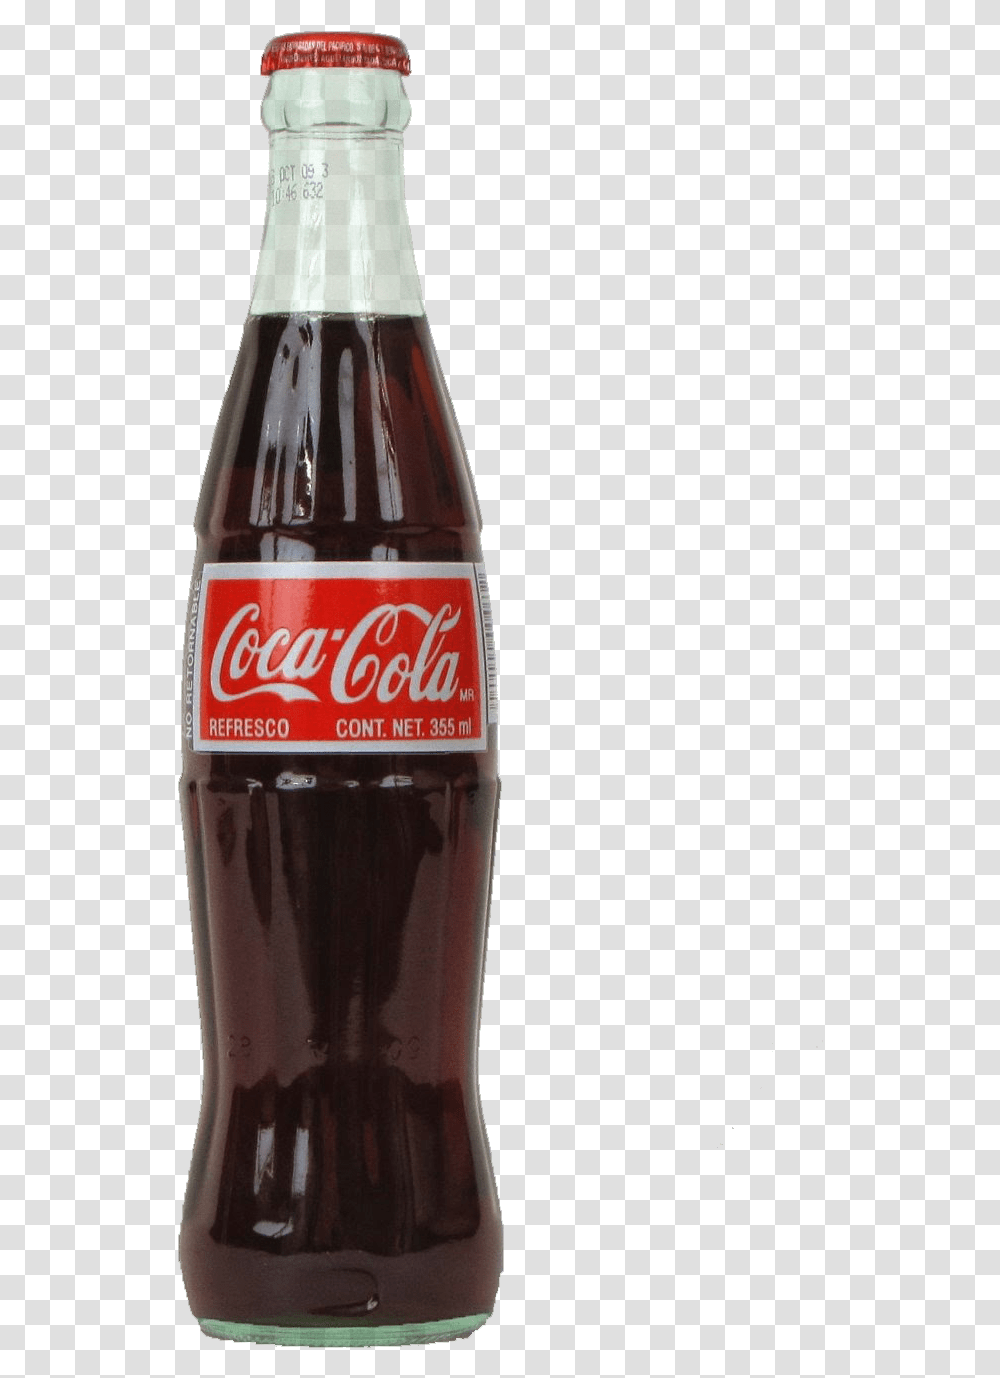 Mexican Coke Mexican Coca Cola Bottles, Beverage, Drink, Beer, Alcohol Transparent Png